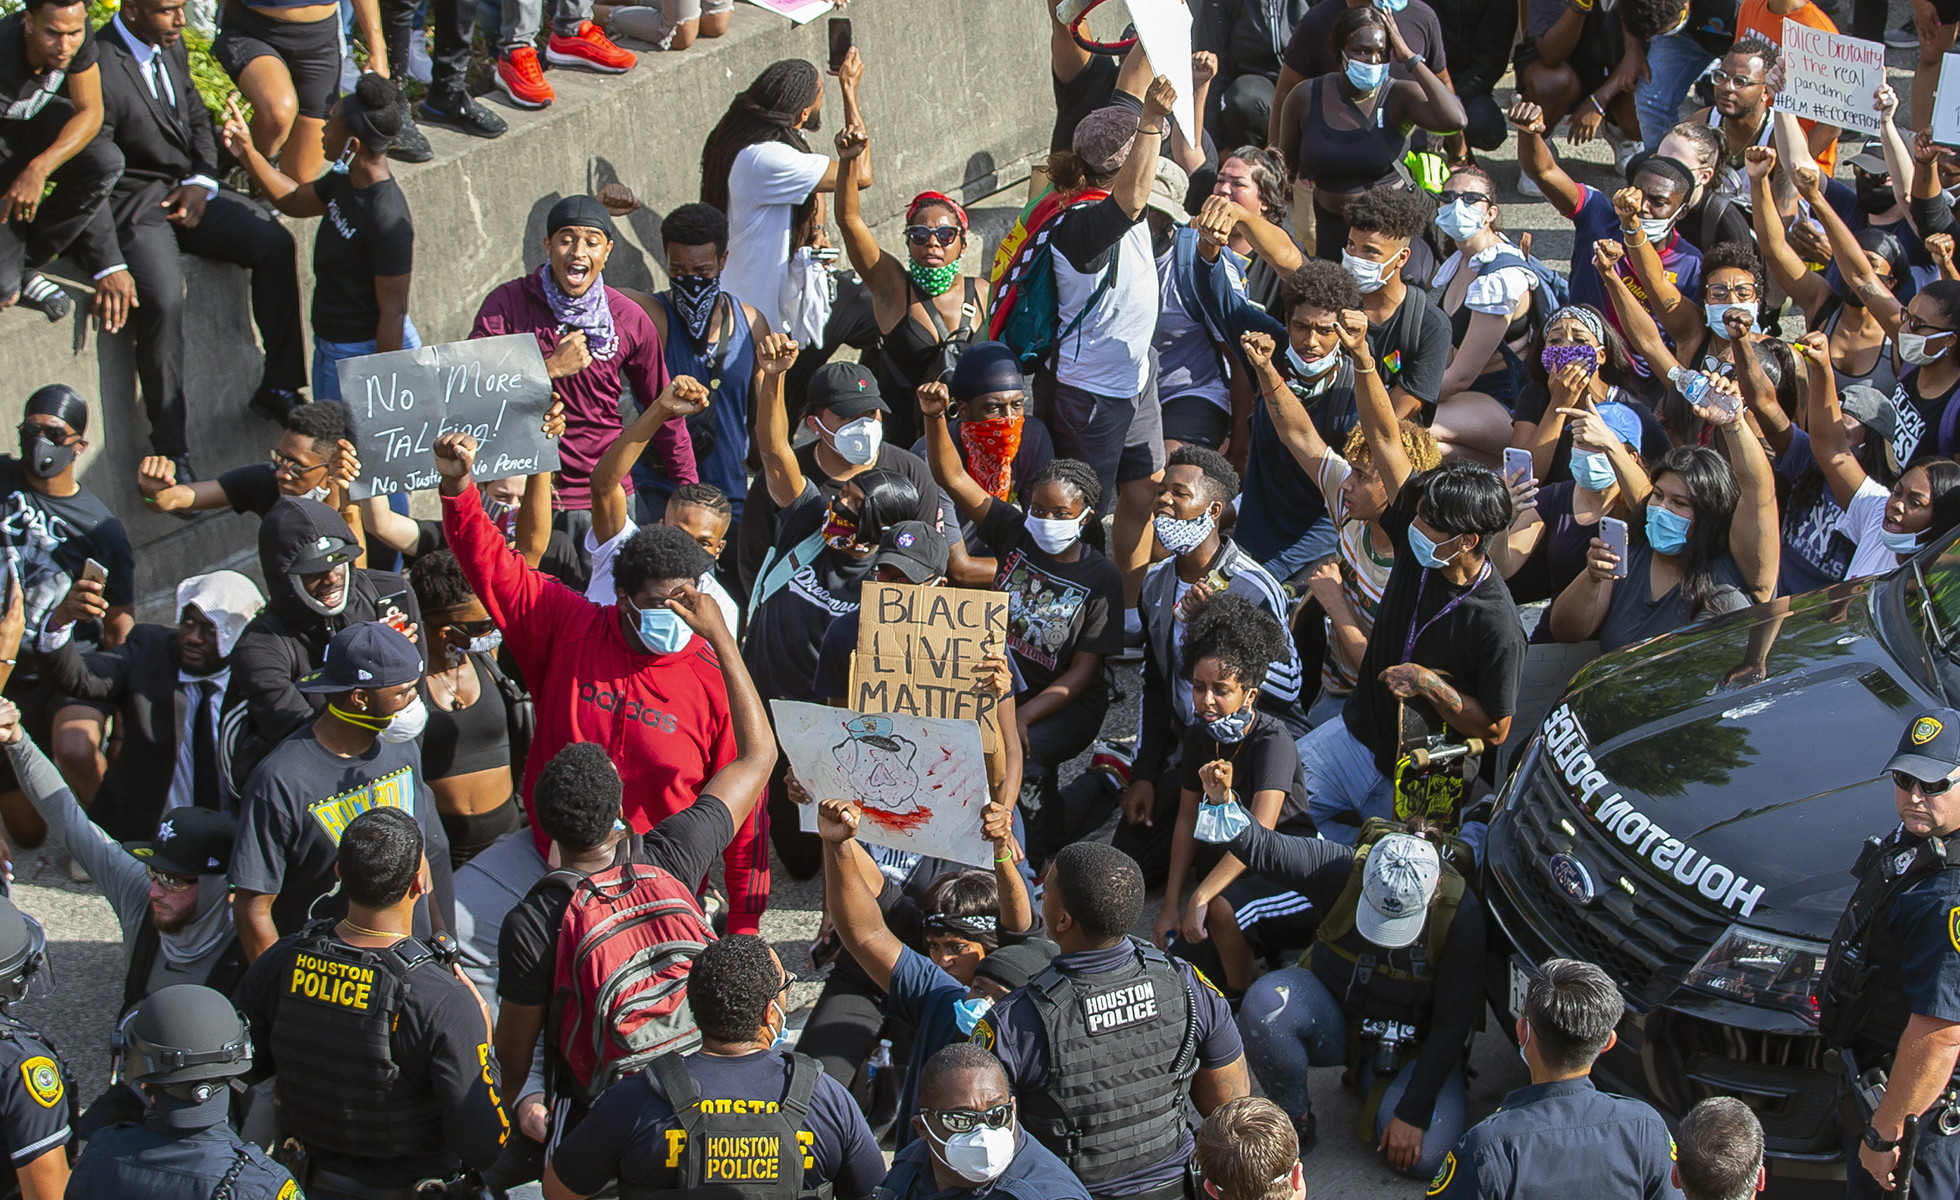 Protesters stop and chant "I can't breathe" as they march northbound on 288 just south of Tuam Street during a demonstration related to the death of George Floyd, a handcuffed black man who died Memorial Day while in the custody of the Minneapolis police, in Houston, Friday, May 29, 2020. (Mark Mulligan/Houston Chronicle via AP)